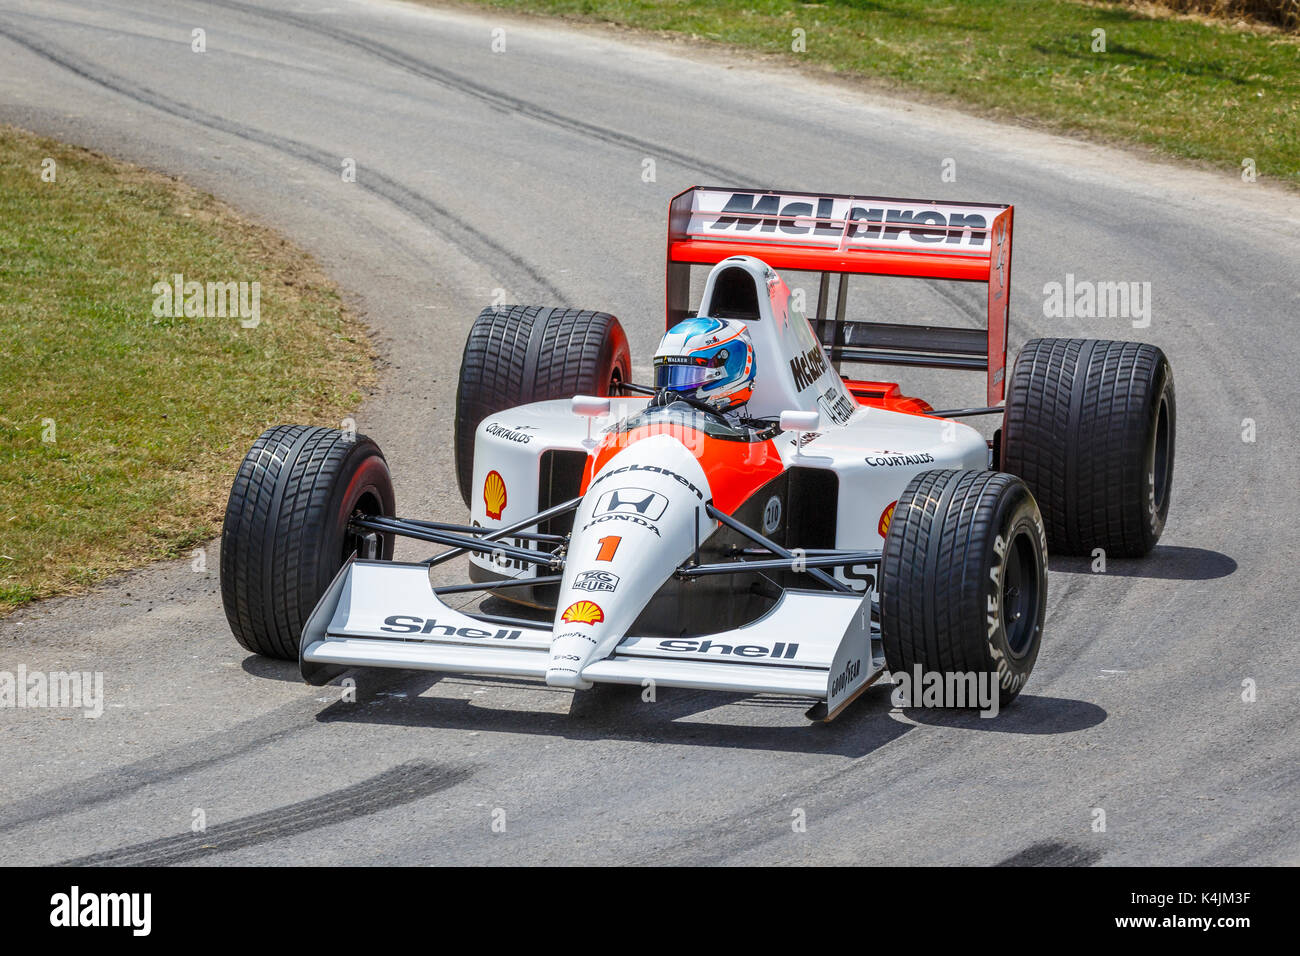 Mclaren F1 Car High Resolution Stock Photography And Images Alamy